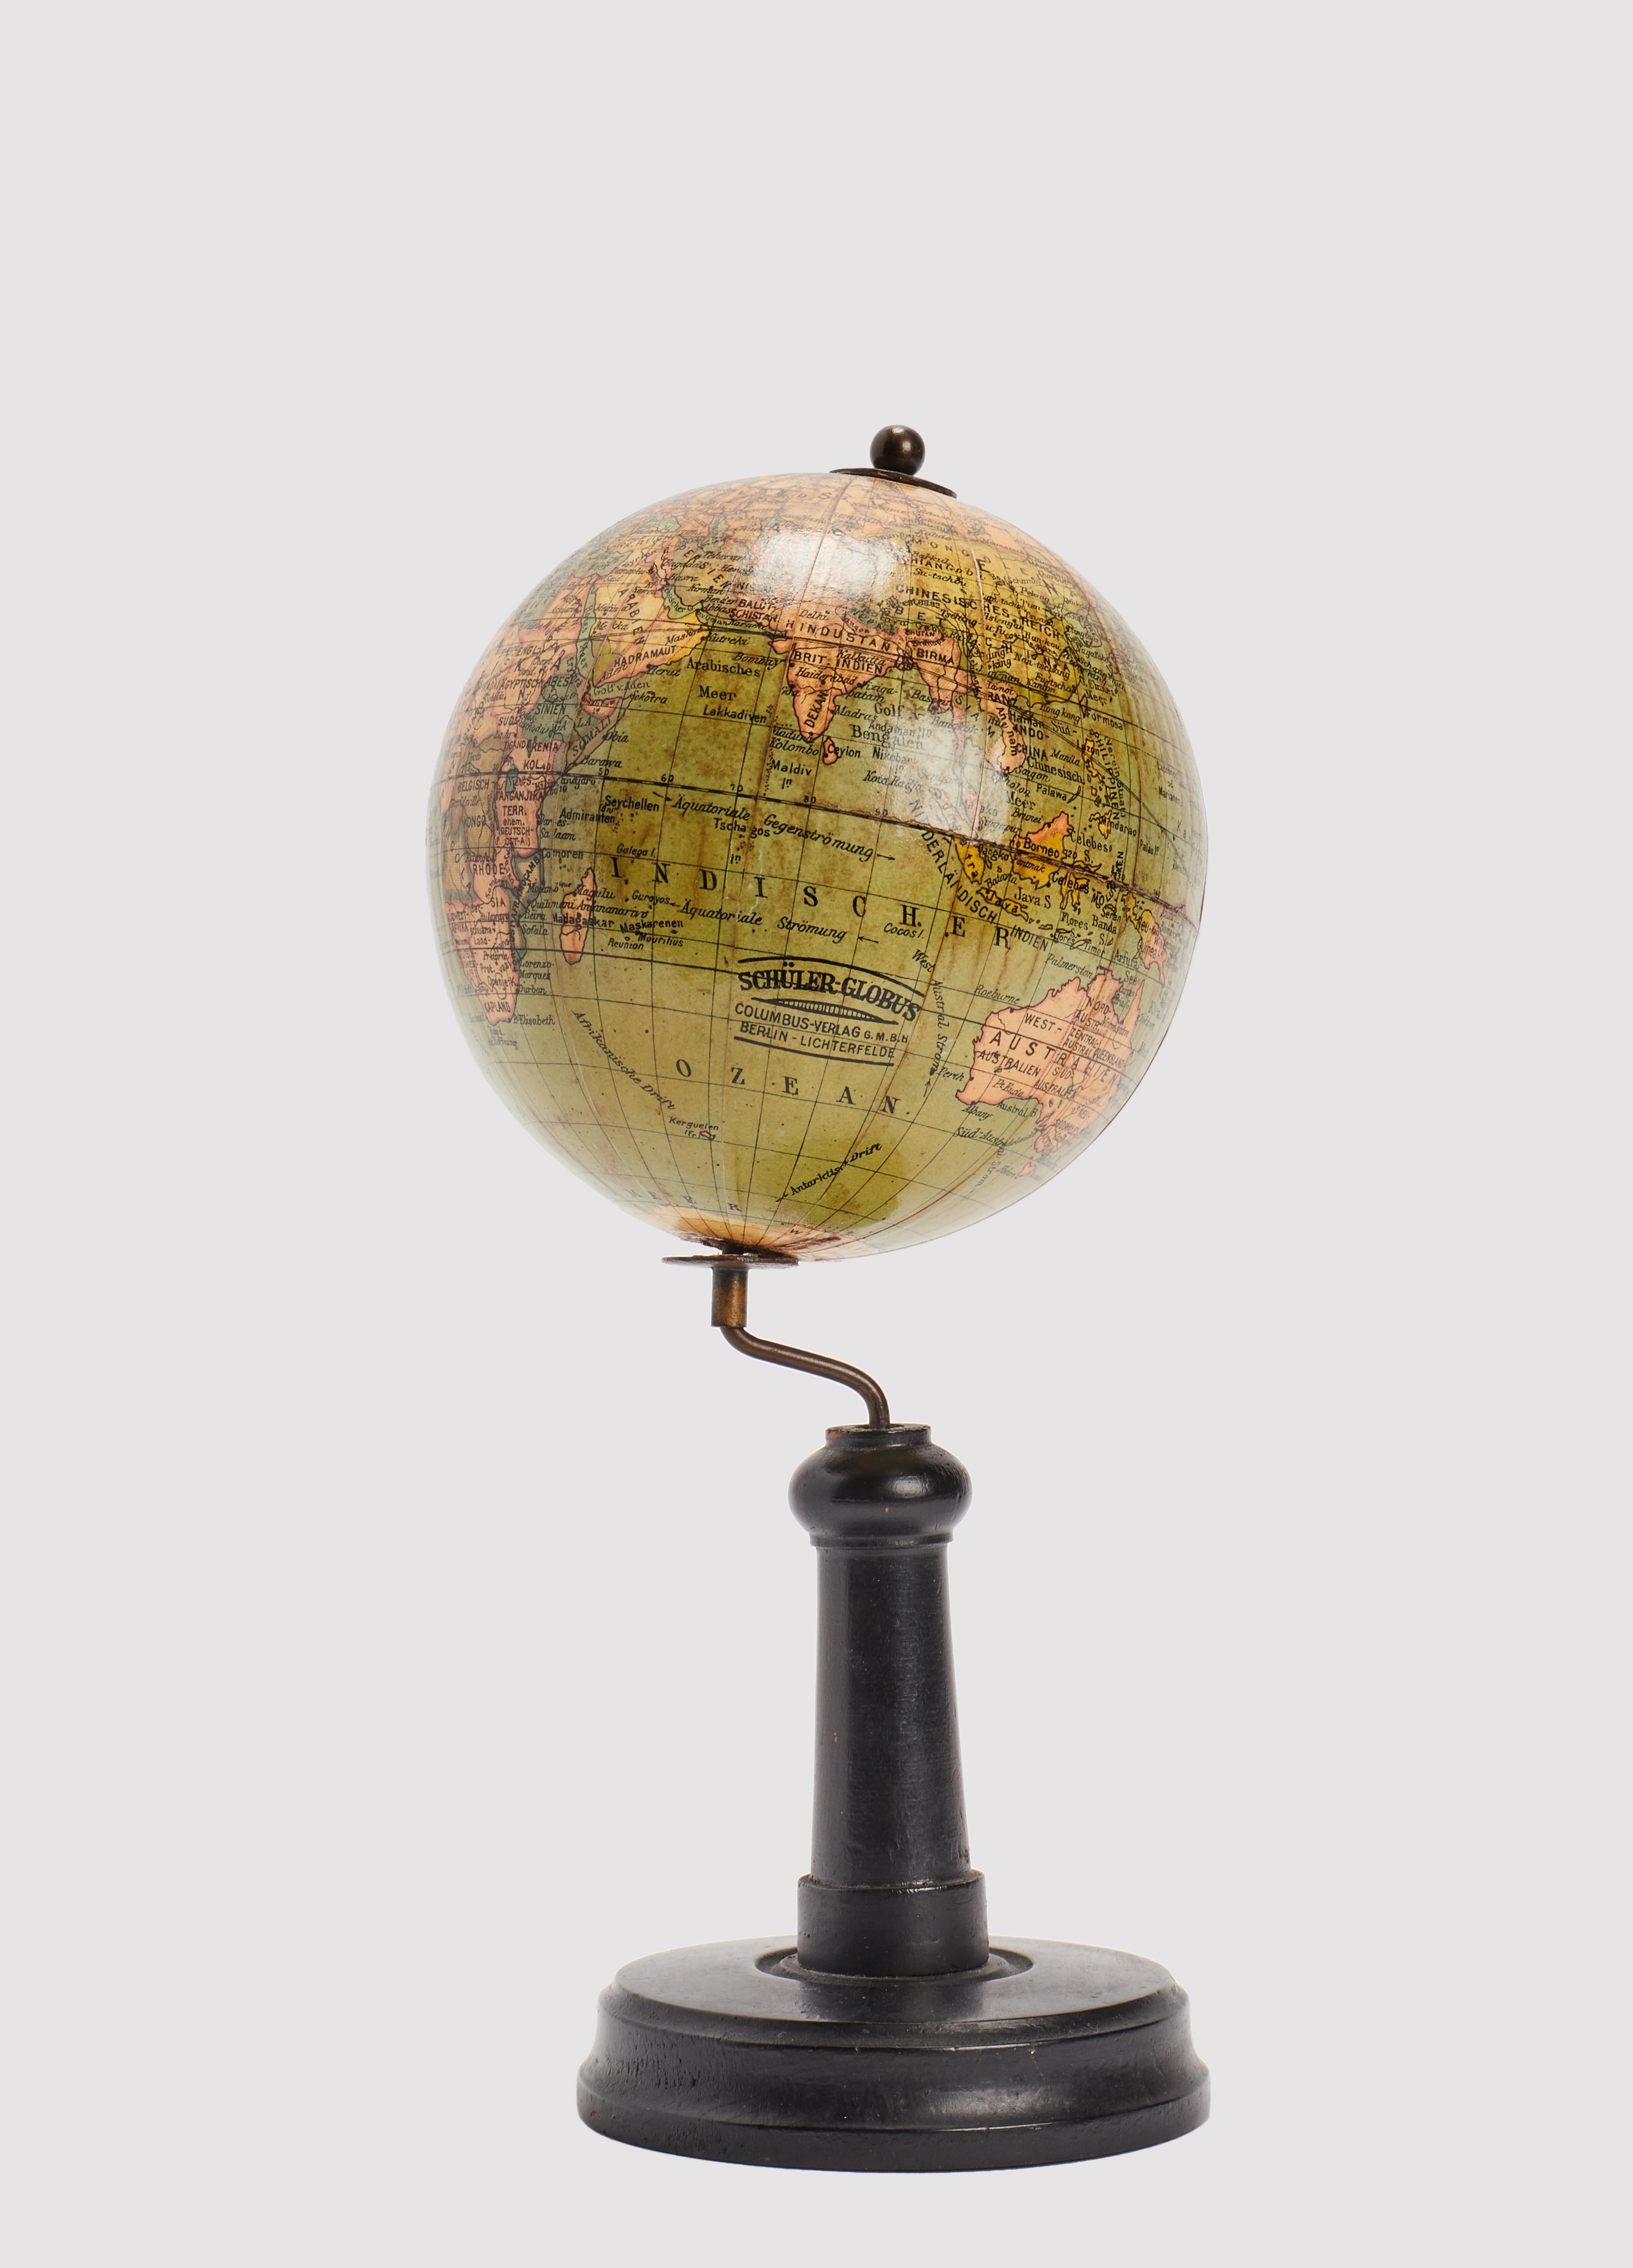 On a wooden base worked on the lathe, with a circular foot, wavy profile and high leg, with original patina, there is a small globe, published by Columbus, Berlin. The globe is made of papier-mâché, finished with a fine paste and completed by the